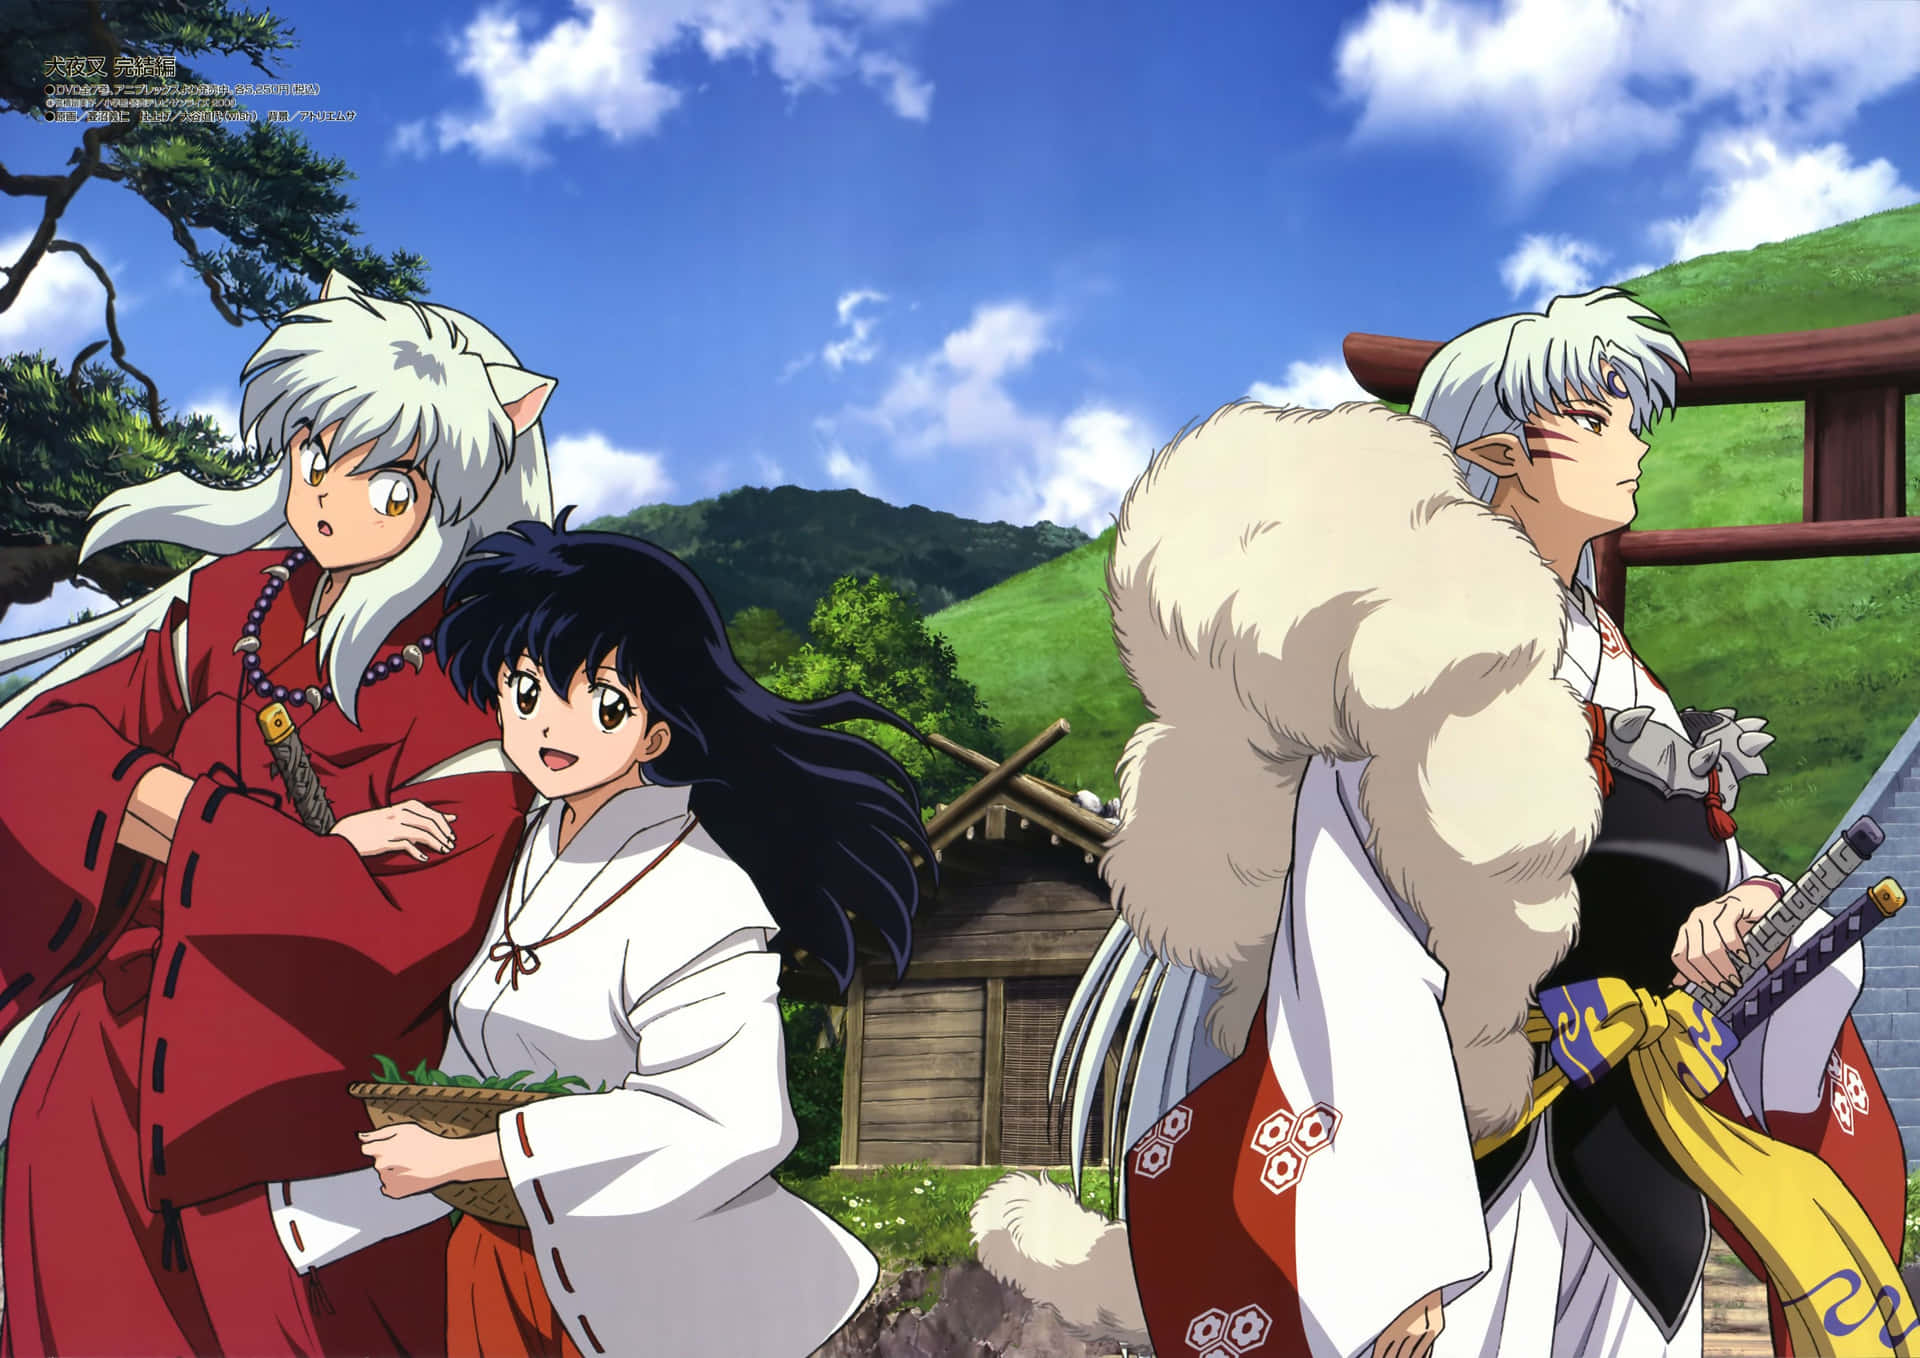 "Inuyasha triumphs in classic anime adventure!" Wallpaper